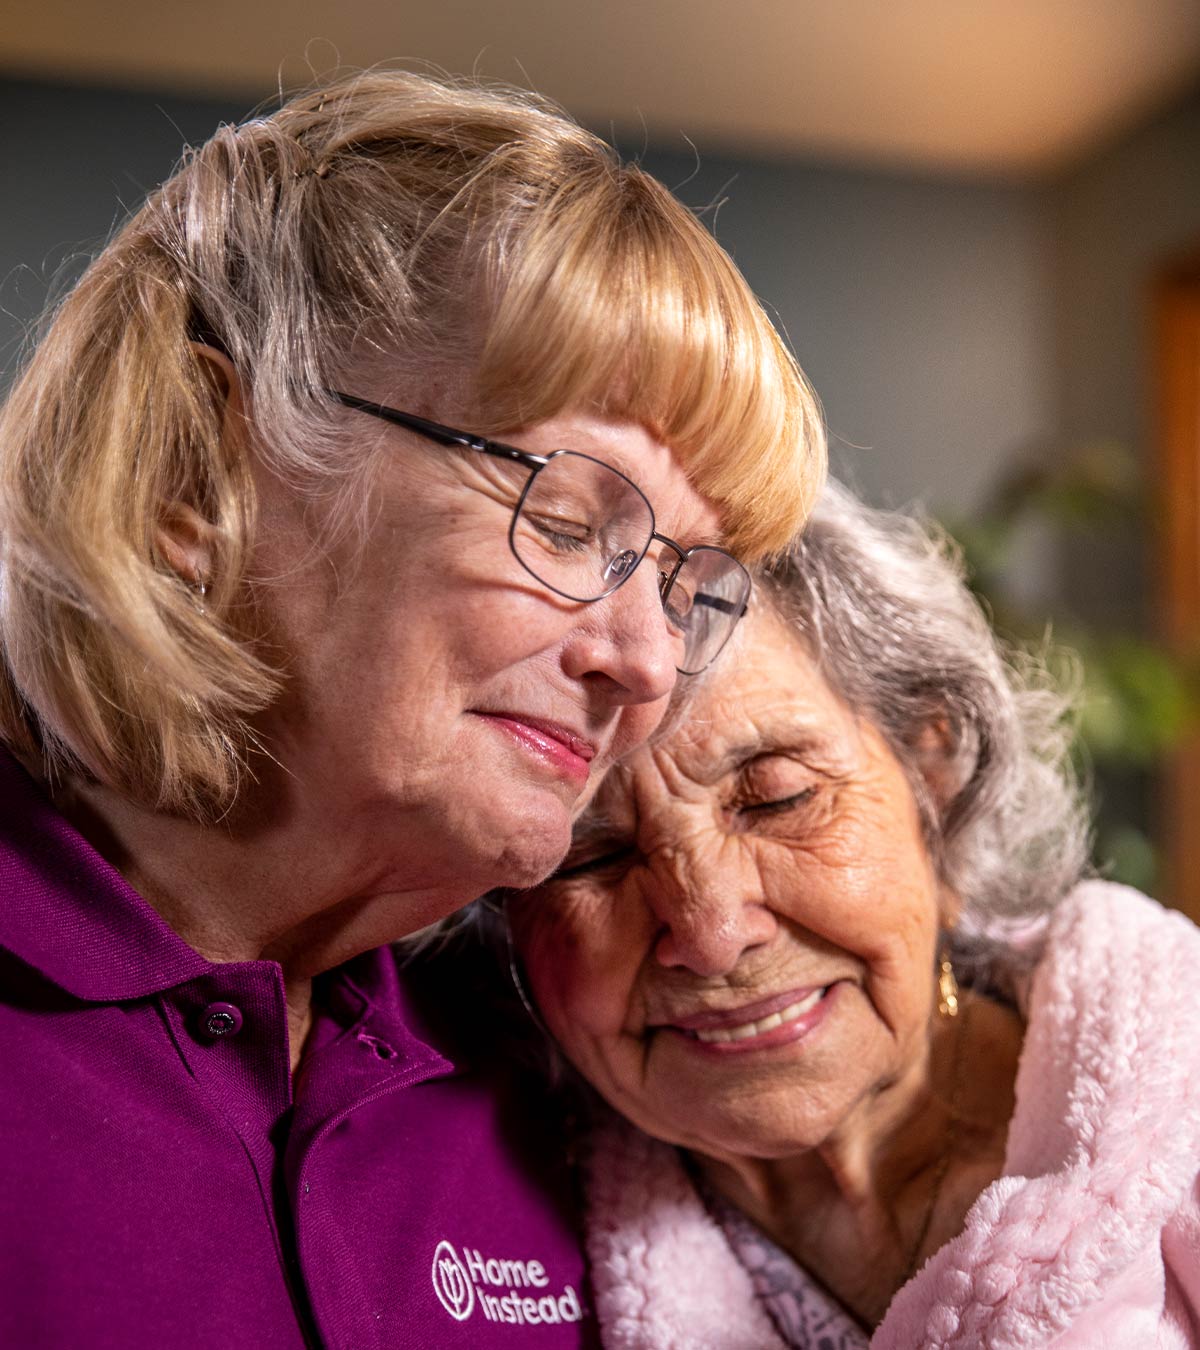 CAREGiver providing in-home senior care services. Home Instead of Richmond, BC provides Elder Care to aging adults. 